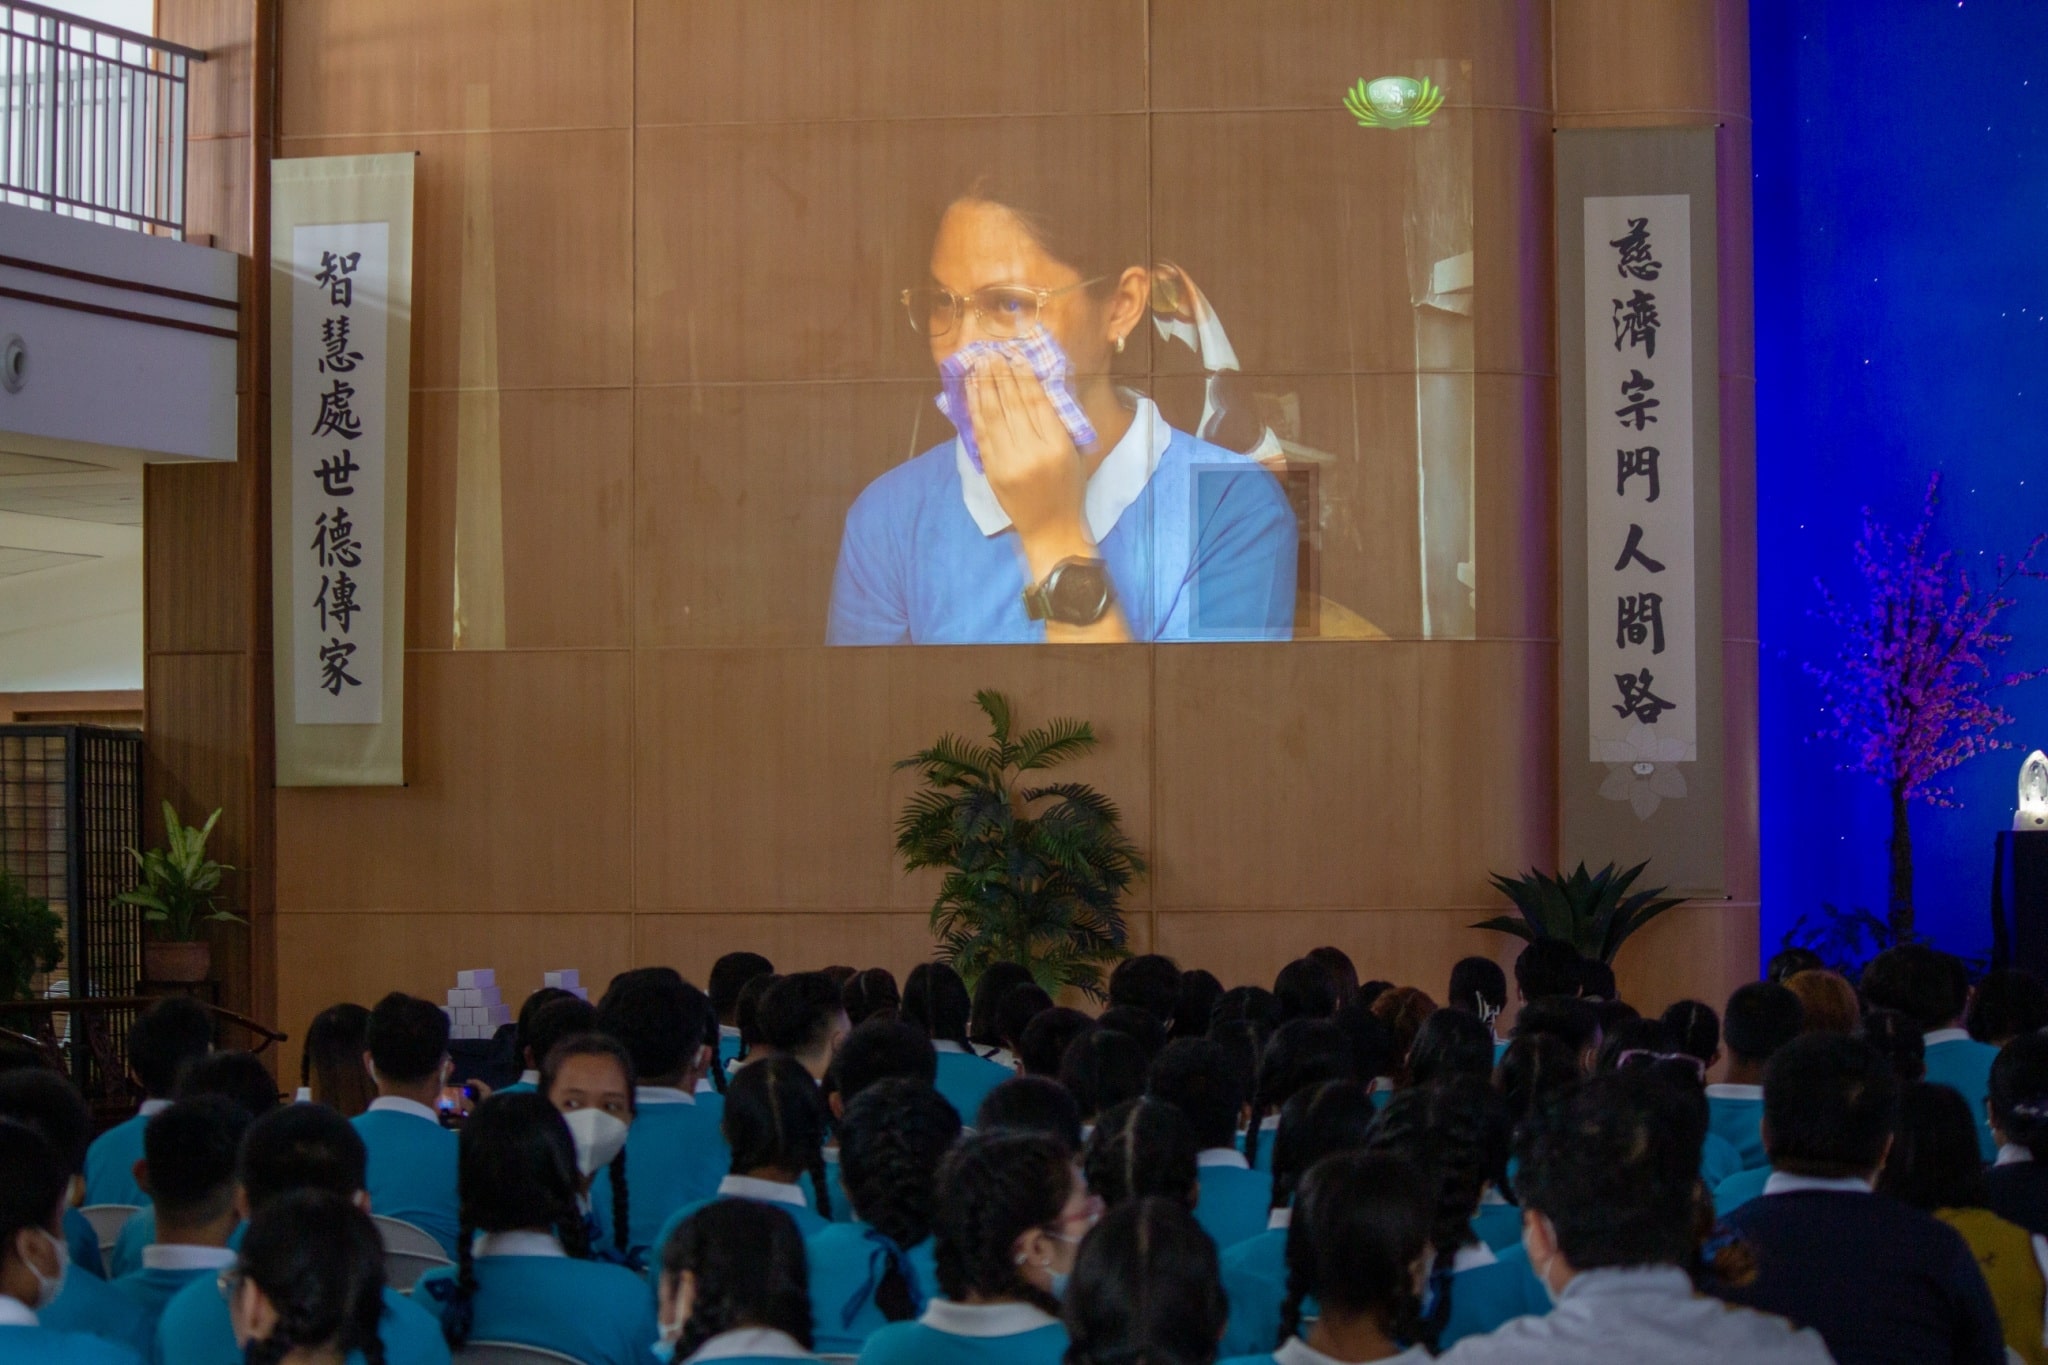 Scholars watch intently on the screen as Rhea Mae Baay shares her story in a special video presentation. 【Photo by Marella Saldonido】